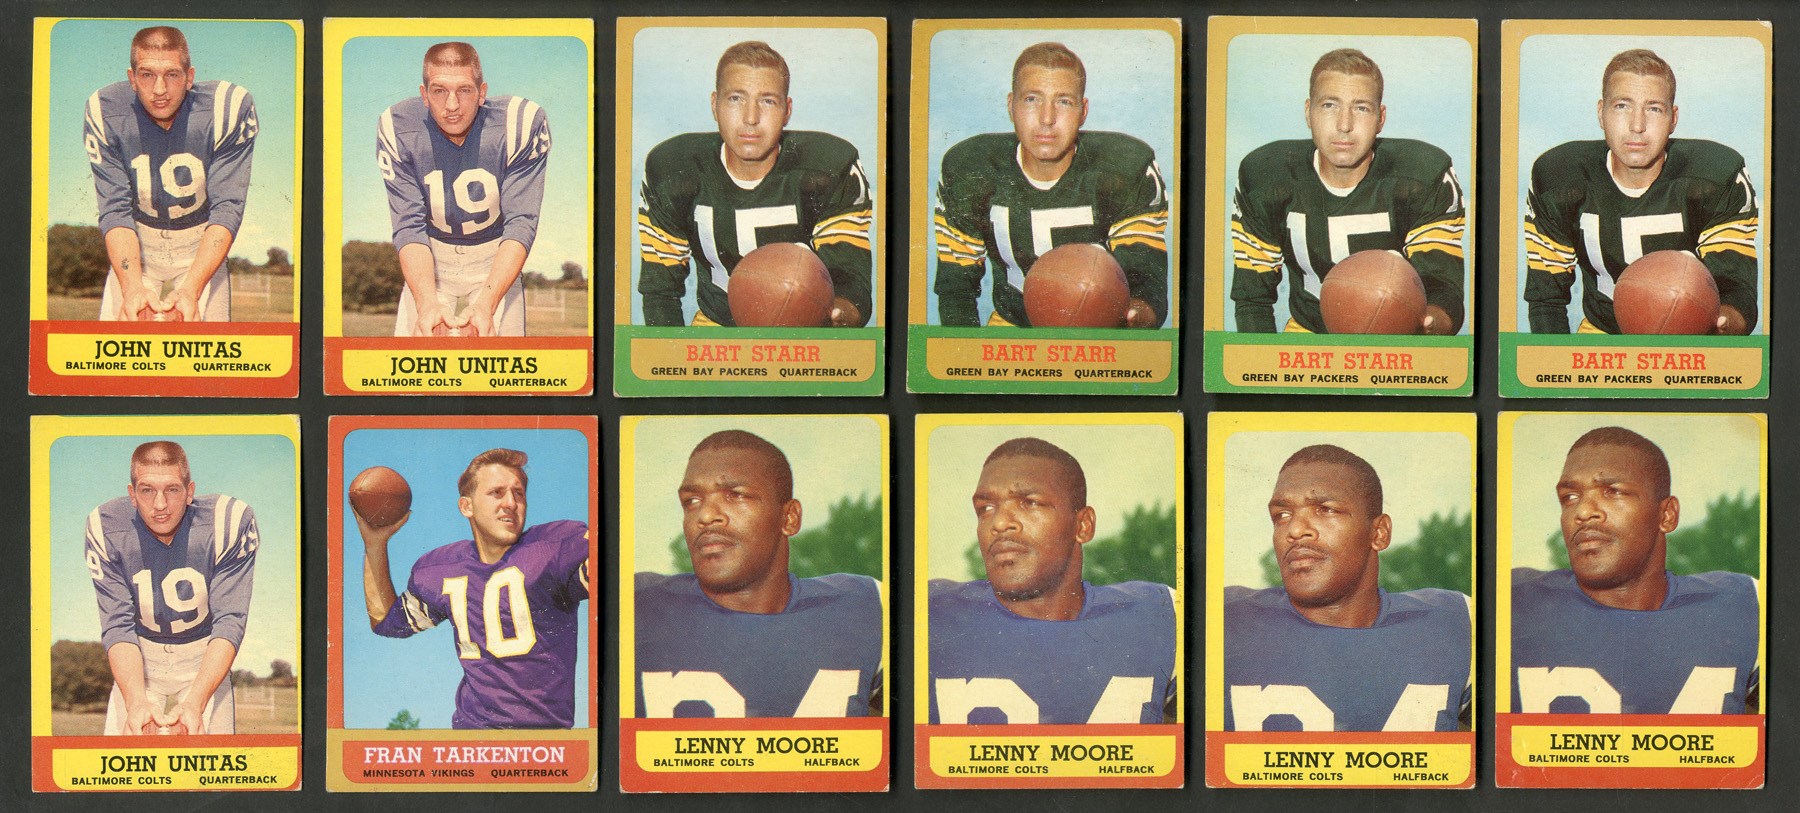 Baseball and Trading Cards - 1963 Topps Football Near Complete Set w/Unitas & Starr (130/170)